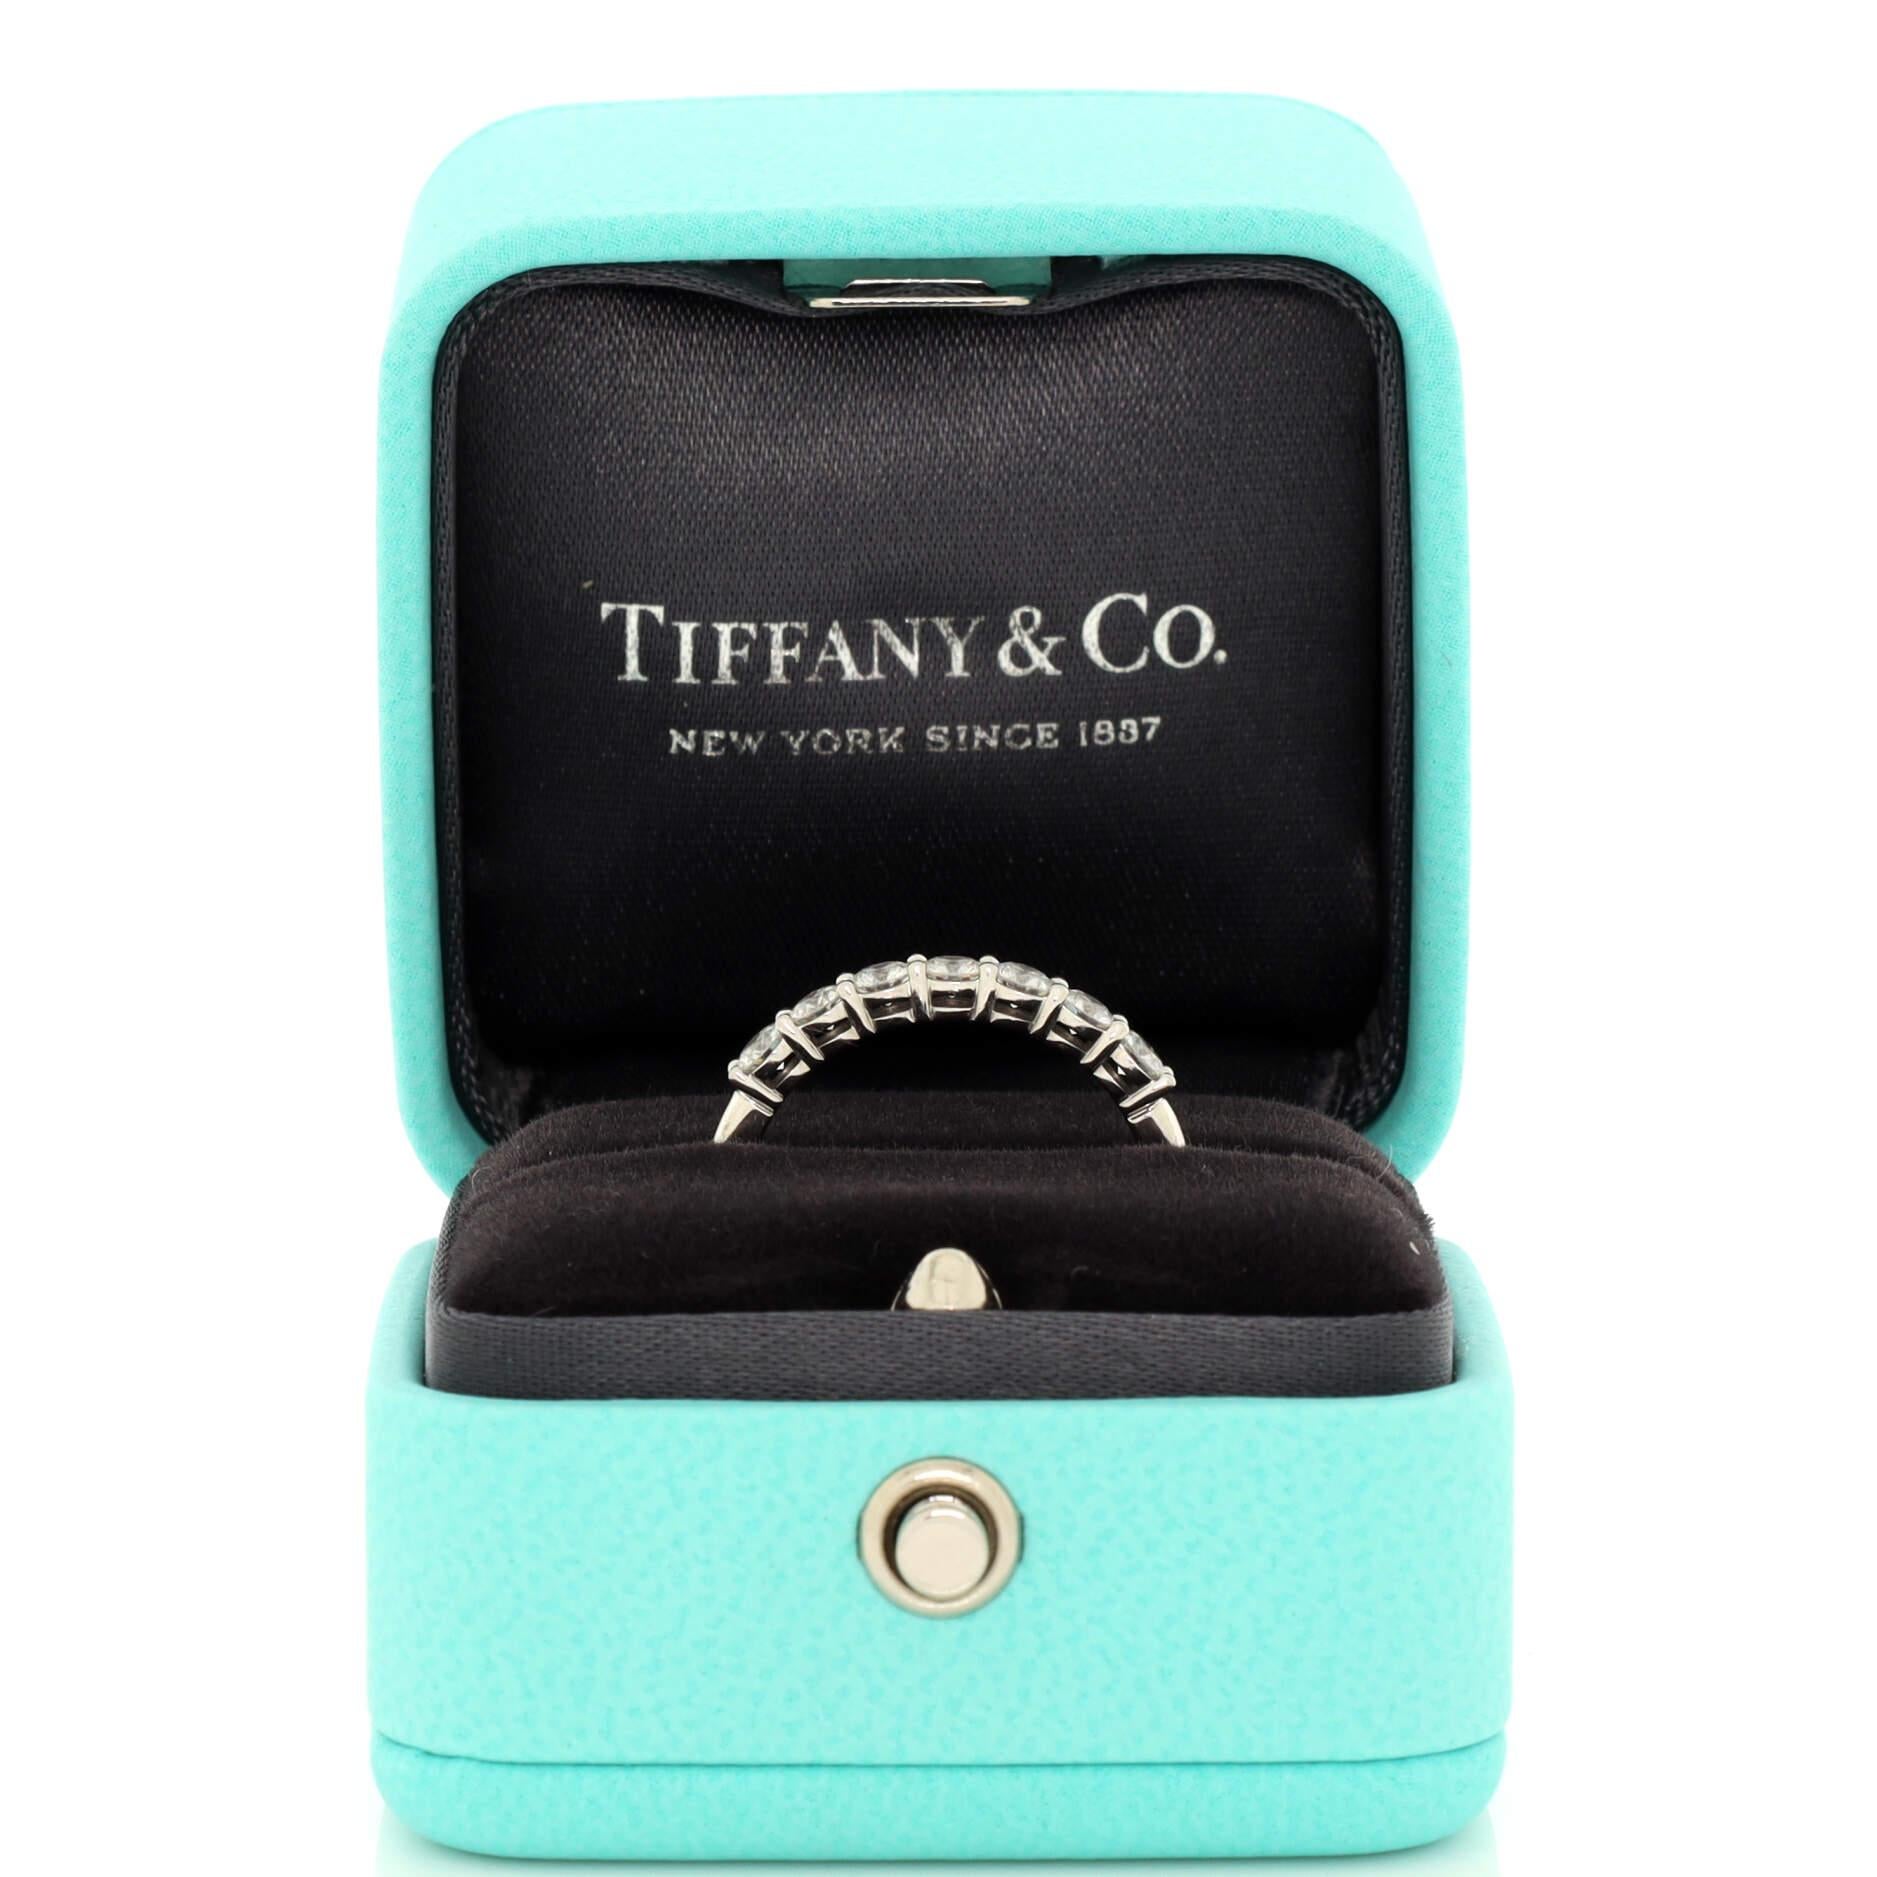 Condition: Good. Moderately heavy wear throughout.
Accessories: No Accessories
Measurements: Size: 7, Width: 2.00 mm
Designer: Tiffany & Co.
Model: Forever Band Ring Platinum with Diamonds
Exterior Color: Silver
Item Number: 226092/1